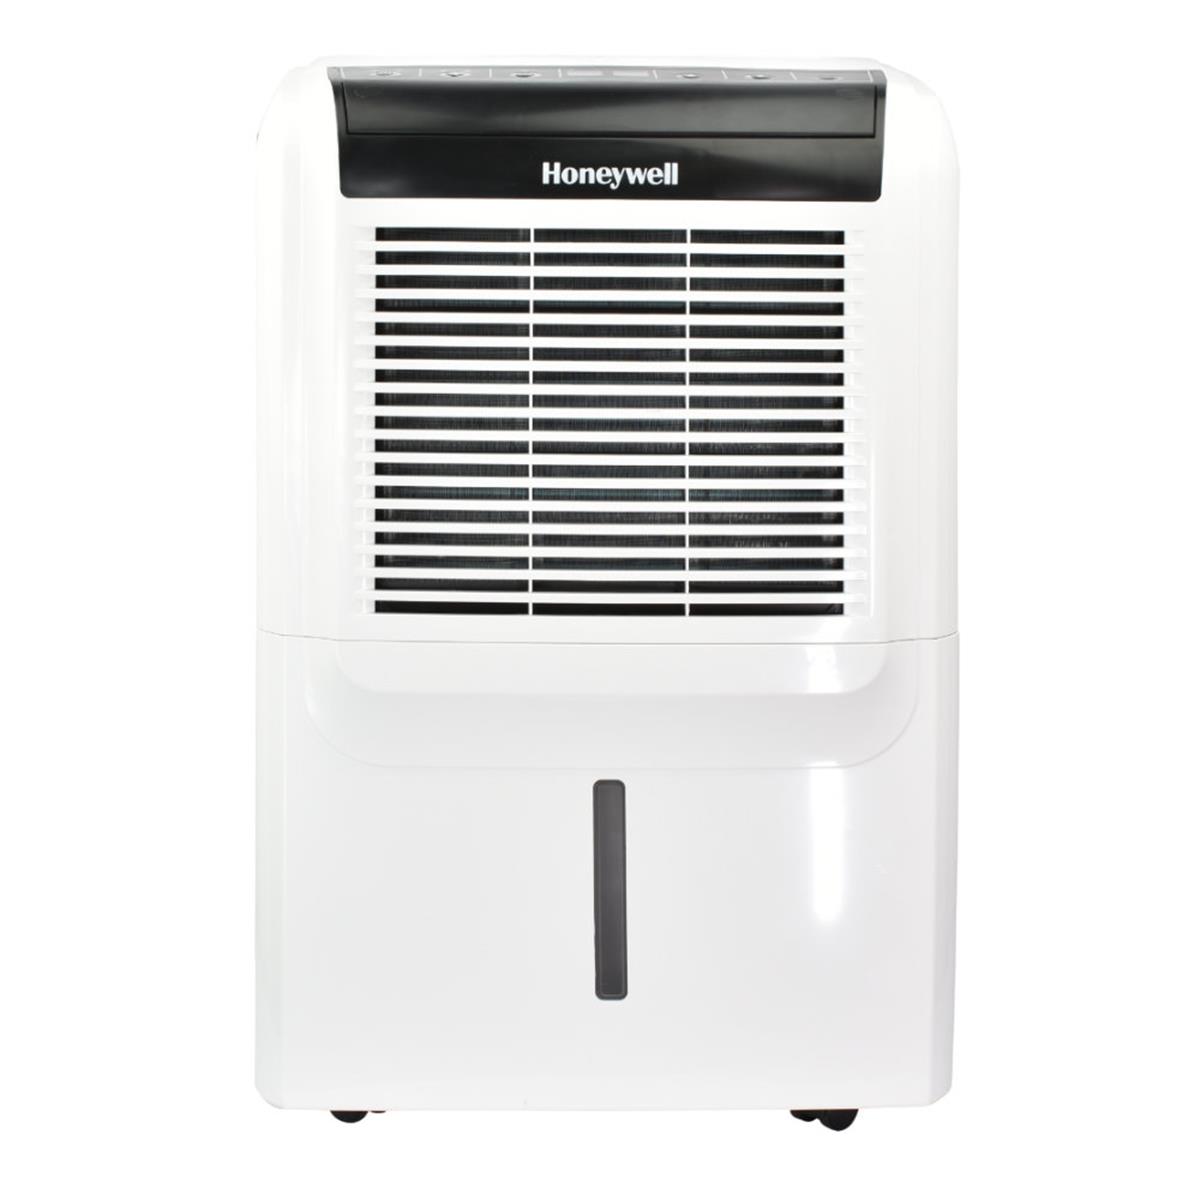 Picture of Honeywell DH70PWKN 70 Pint Portable Dehumidifier with Pump